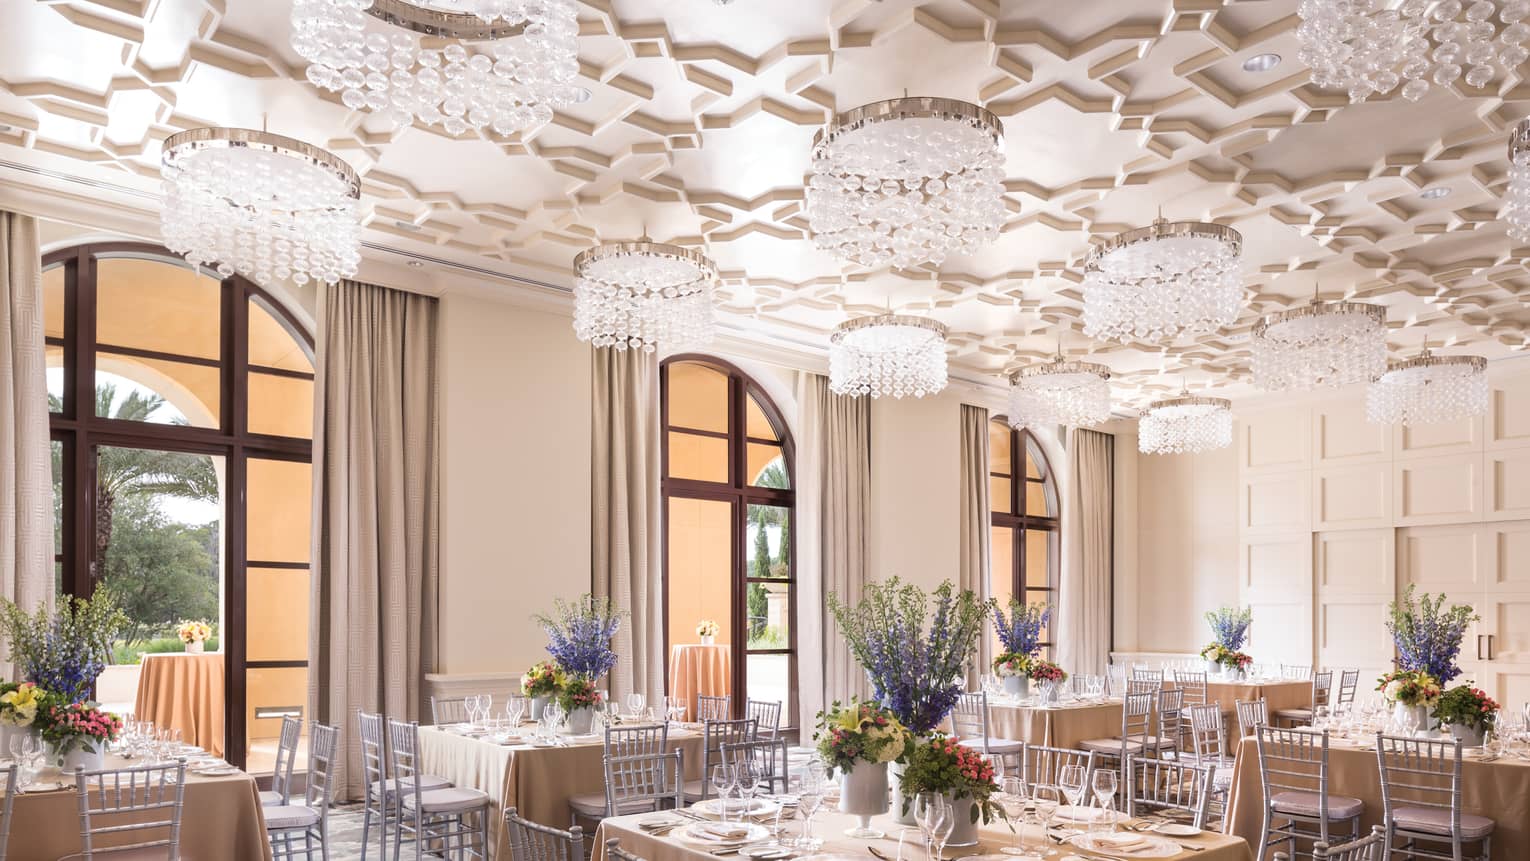 Square banquet dining tables under geometric ceiling with crystal chandeliers 